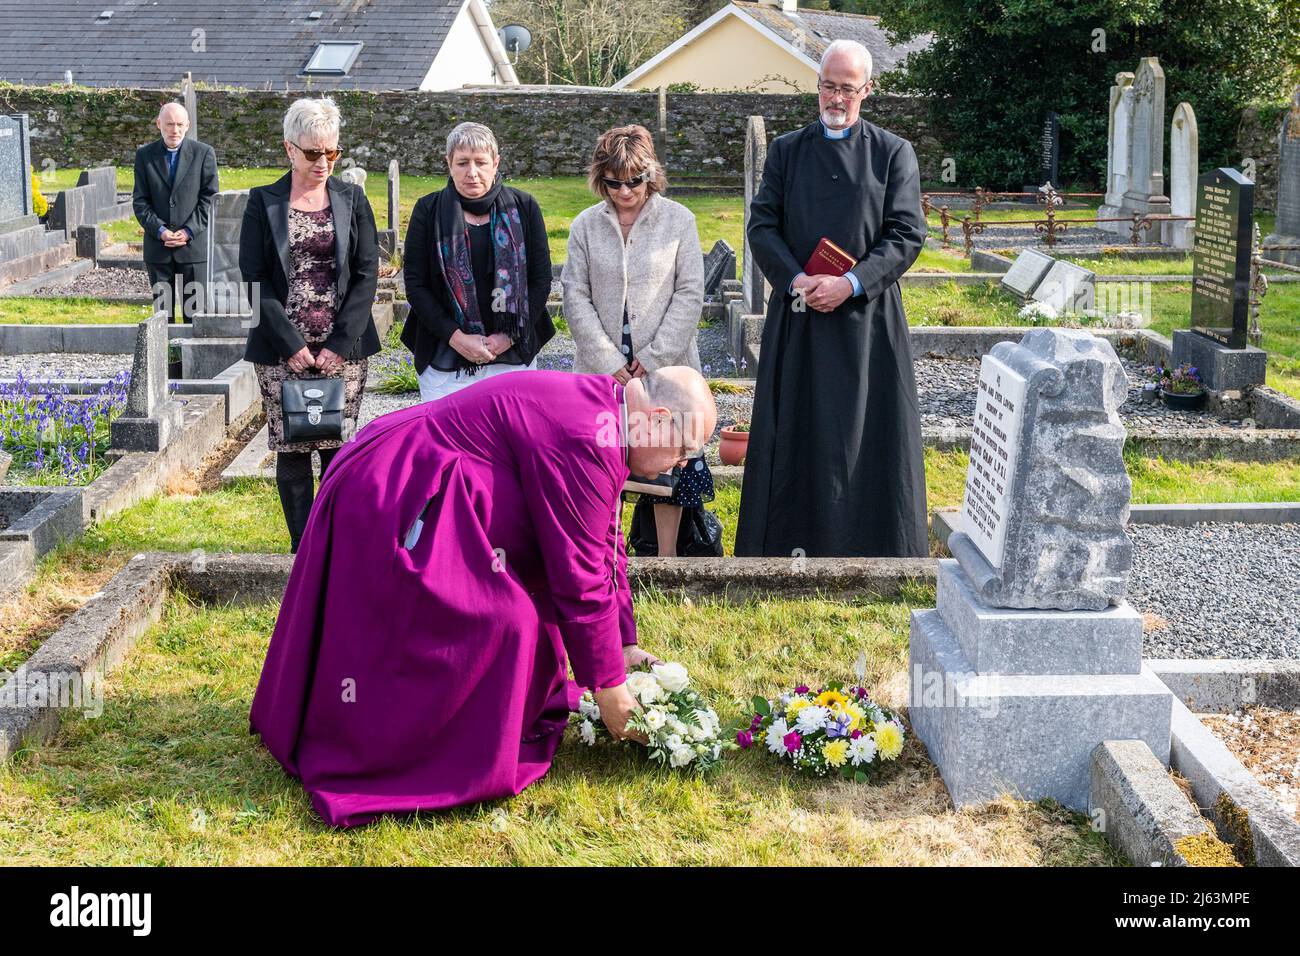 Dunmanway, West Cork, Ireland. 27th Apr, 2022. Today is the 100th Anniversary of the Bandon Valley killings, where 3 men from Dunmanway were shot dead. Bishop of Cork, Cloyne and Ross, Dr. Paul Colton, lays a wreath on the grave of 37 year old victim David Gray. Credit: AG News/Alamy Live News Stock Photo